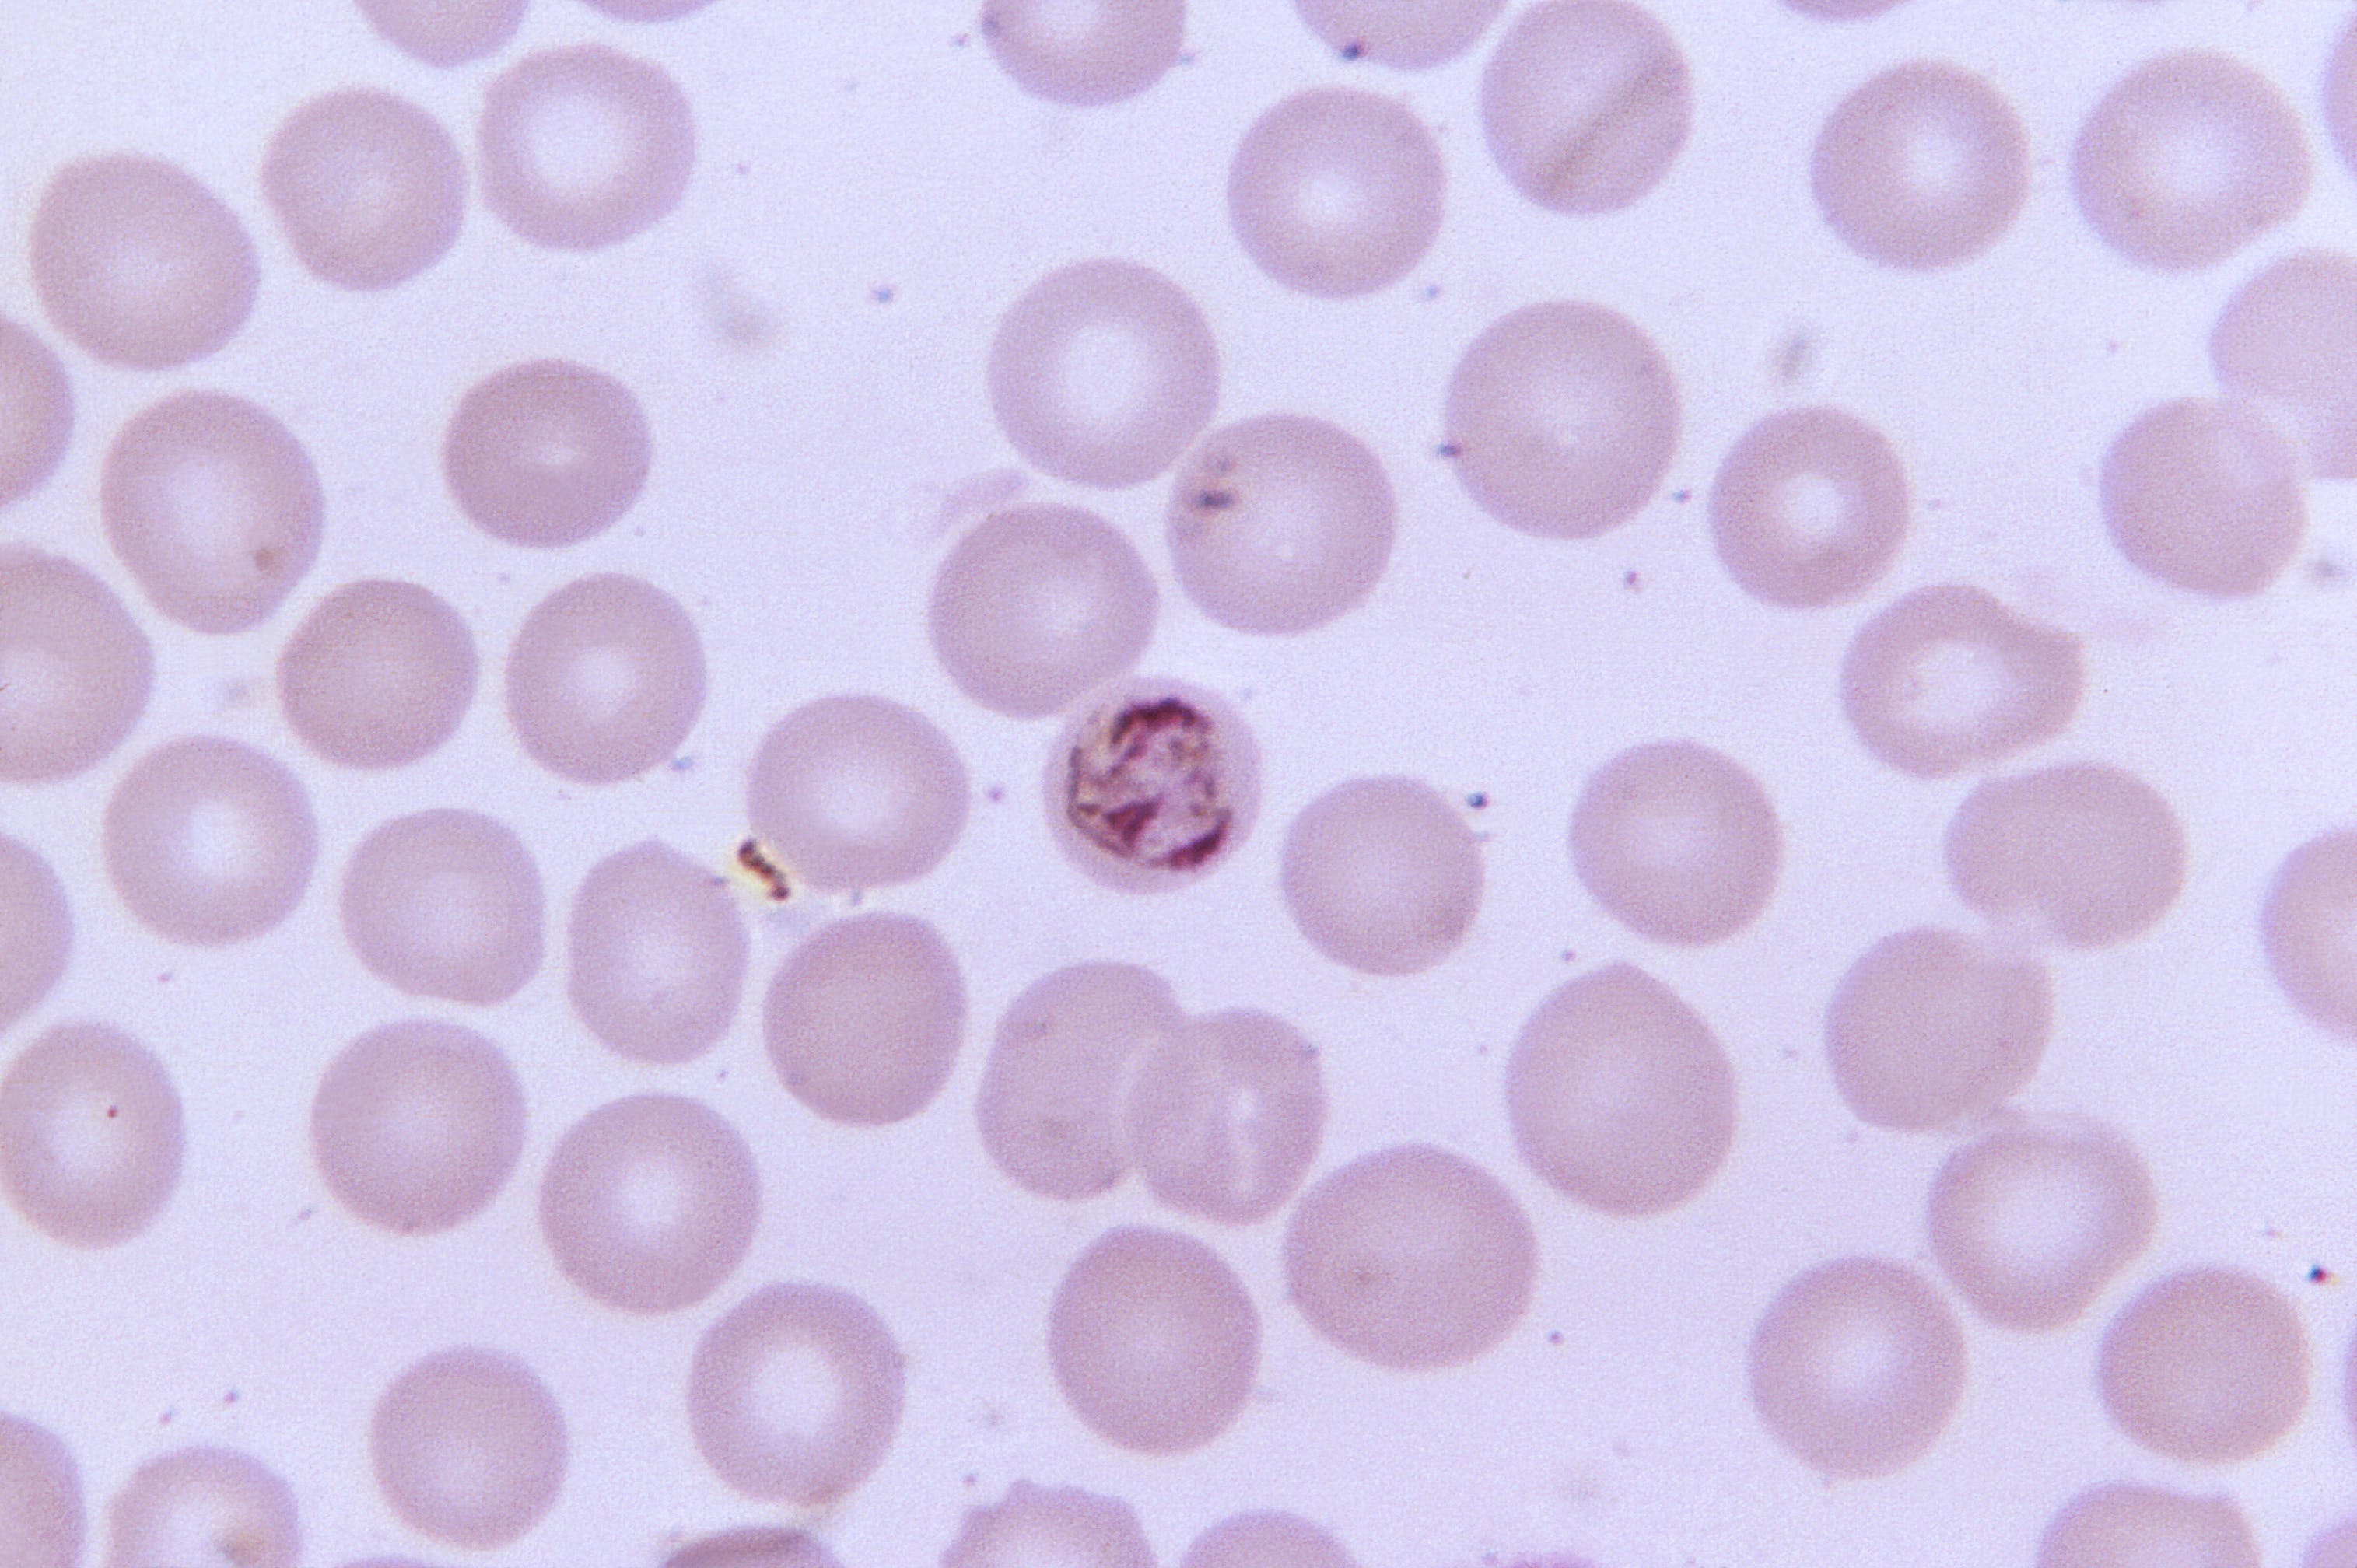 This thin film blood smear photomicrograph depicts an immature, Plasmodium malariae schizont, which contains three chromatin masses, a light cytoplasm, and a dark pigment.